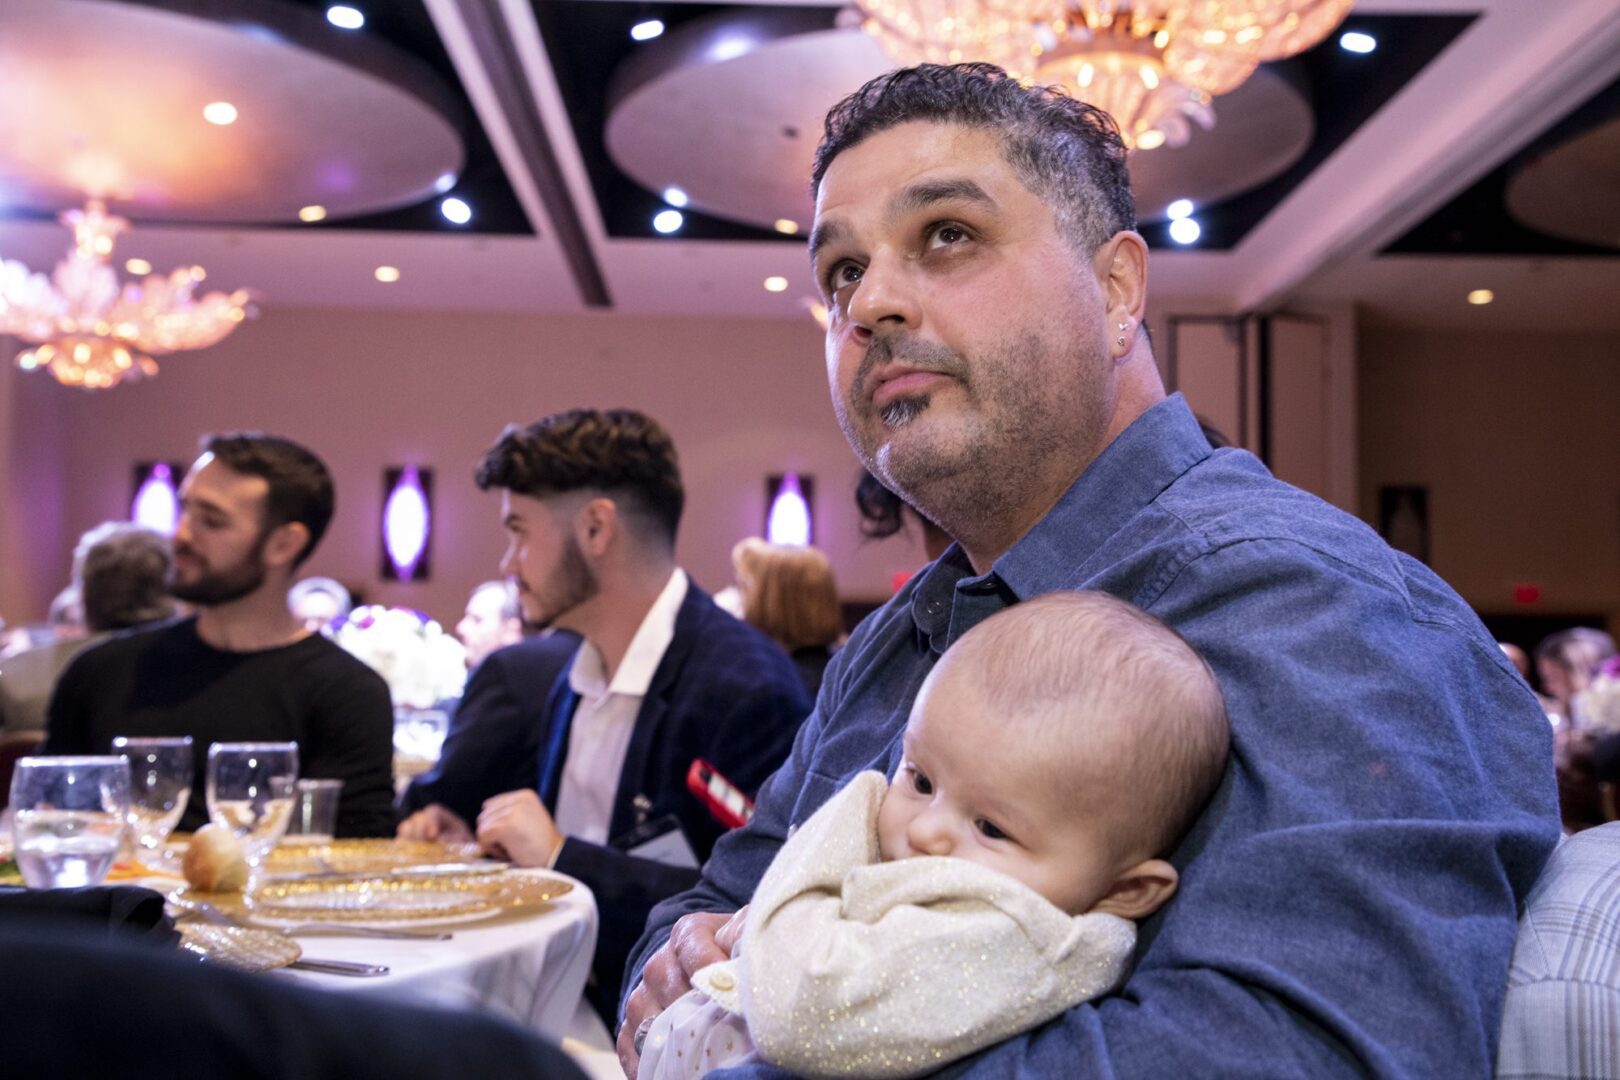 A man holding a baby at a banquet.